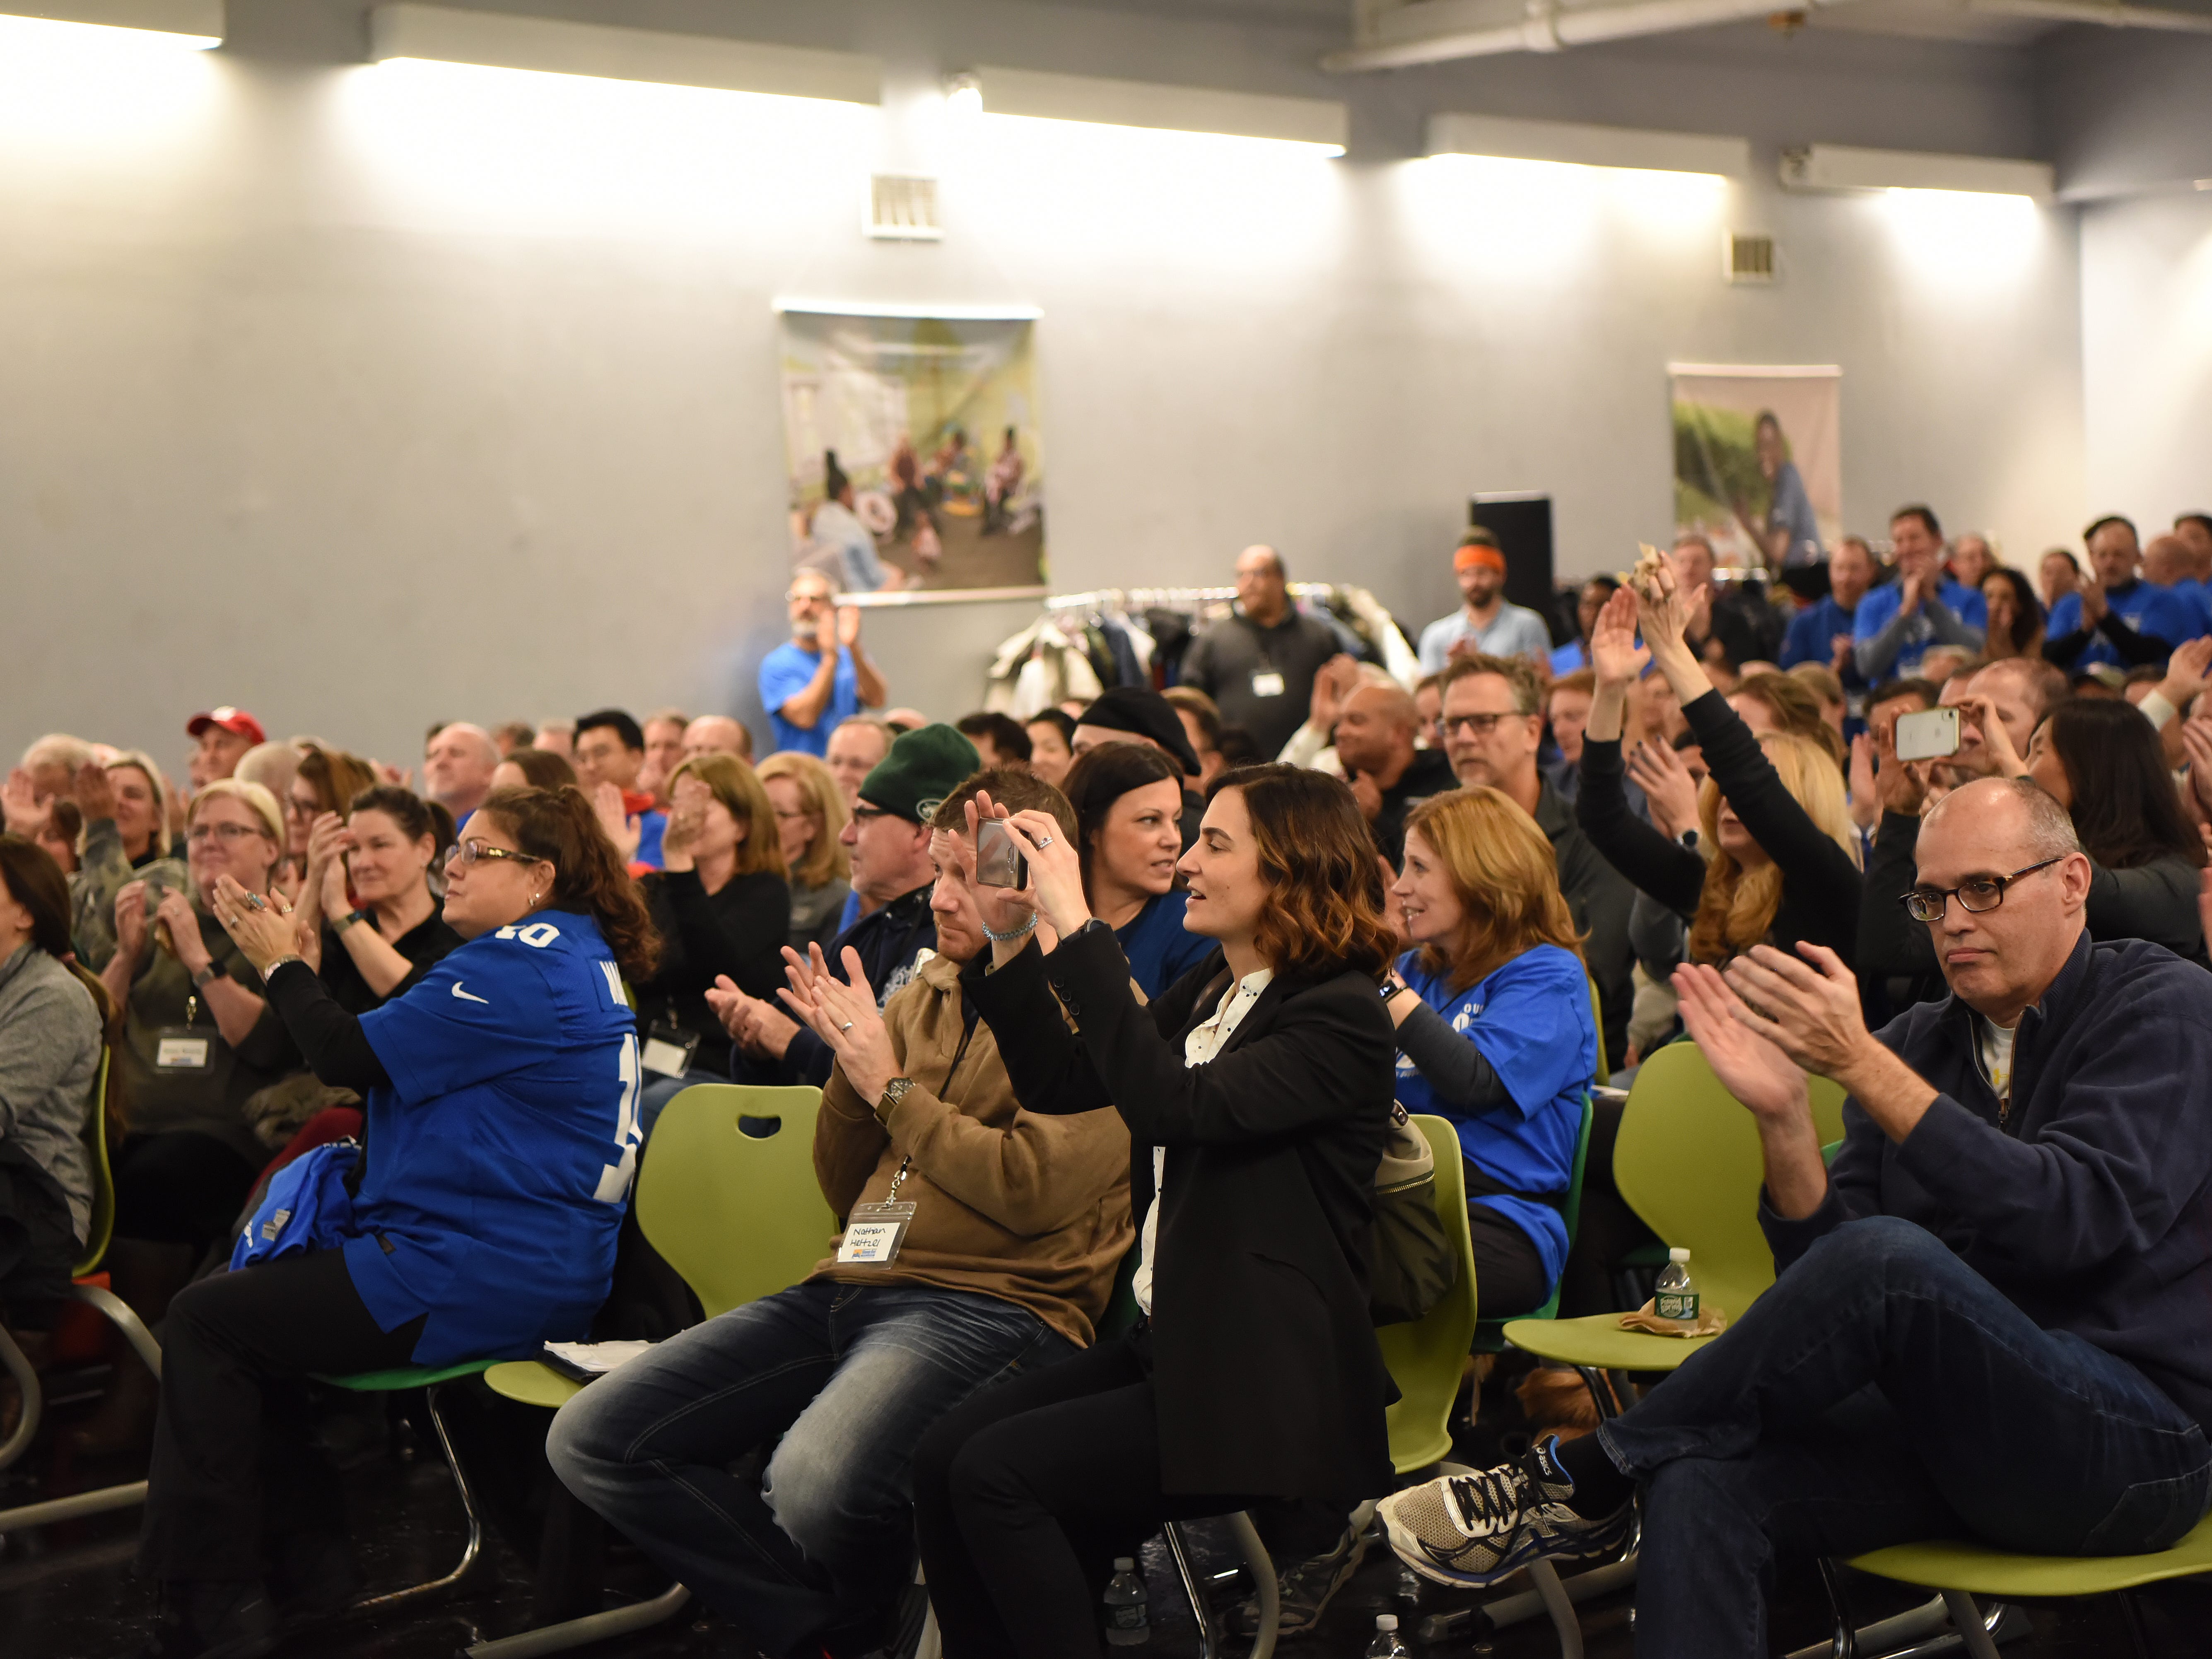 Covenant House holds a Sleep Out Executive Edition in Newark on Thursday November 21, 2019. Attendees cheer after hearing Covenant House raised over $900,000. 